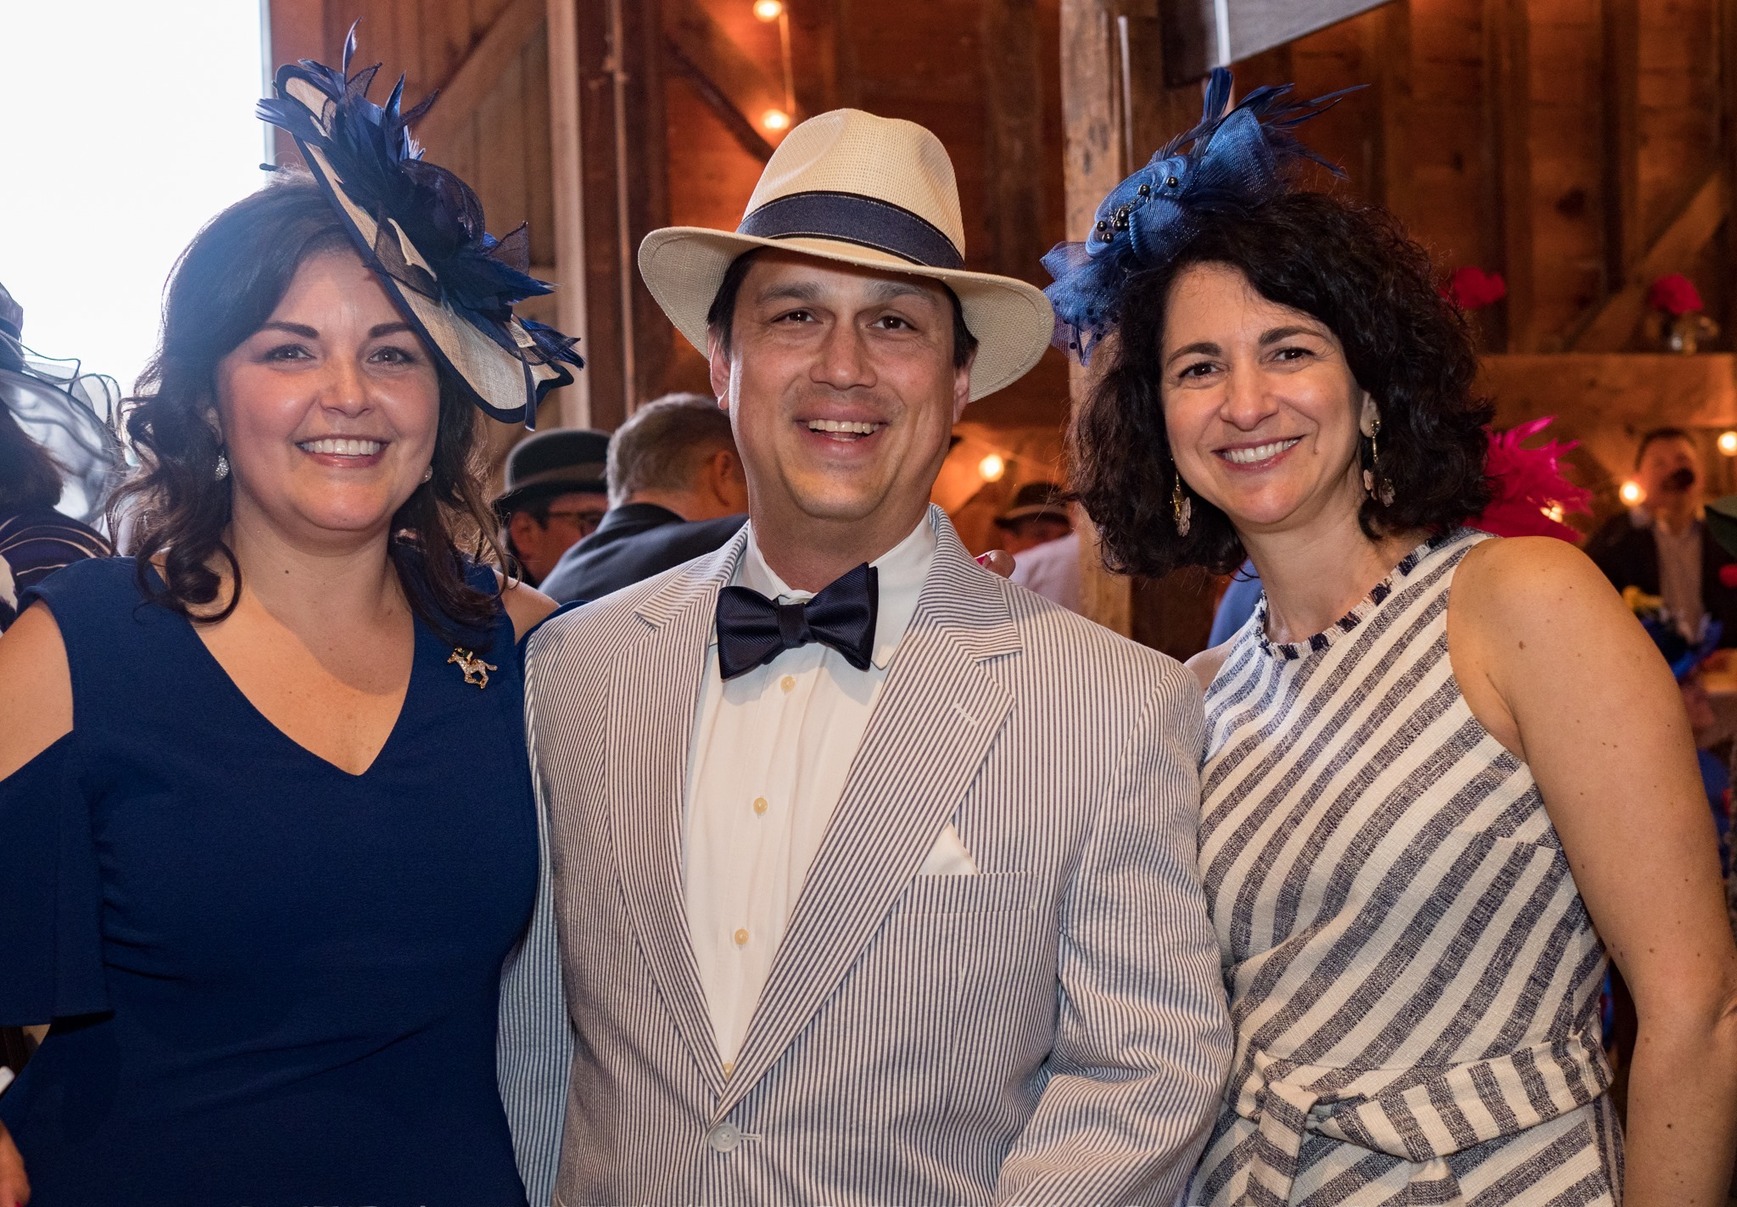 This photo shows a happy group of event attendees. There are two women and one man. They are enjoying themselves at the event. Both women wear big beautiful Kentucky Derby hats.